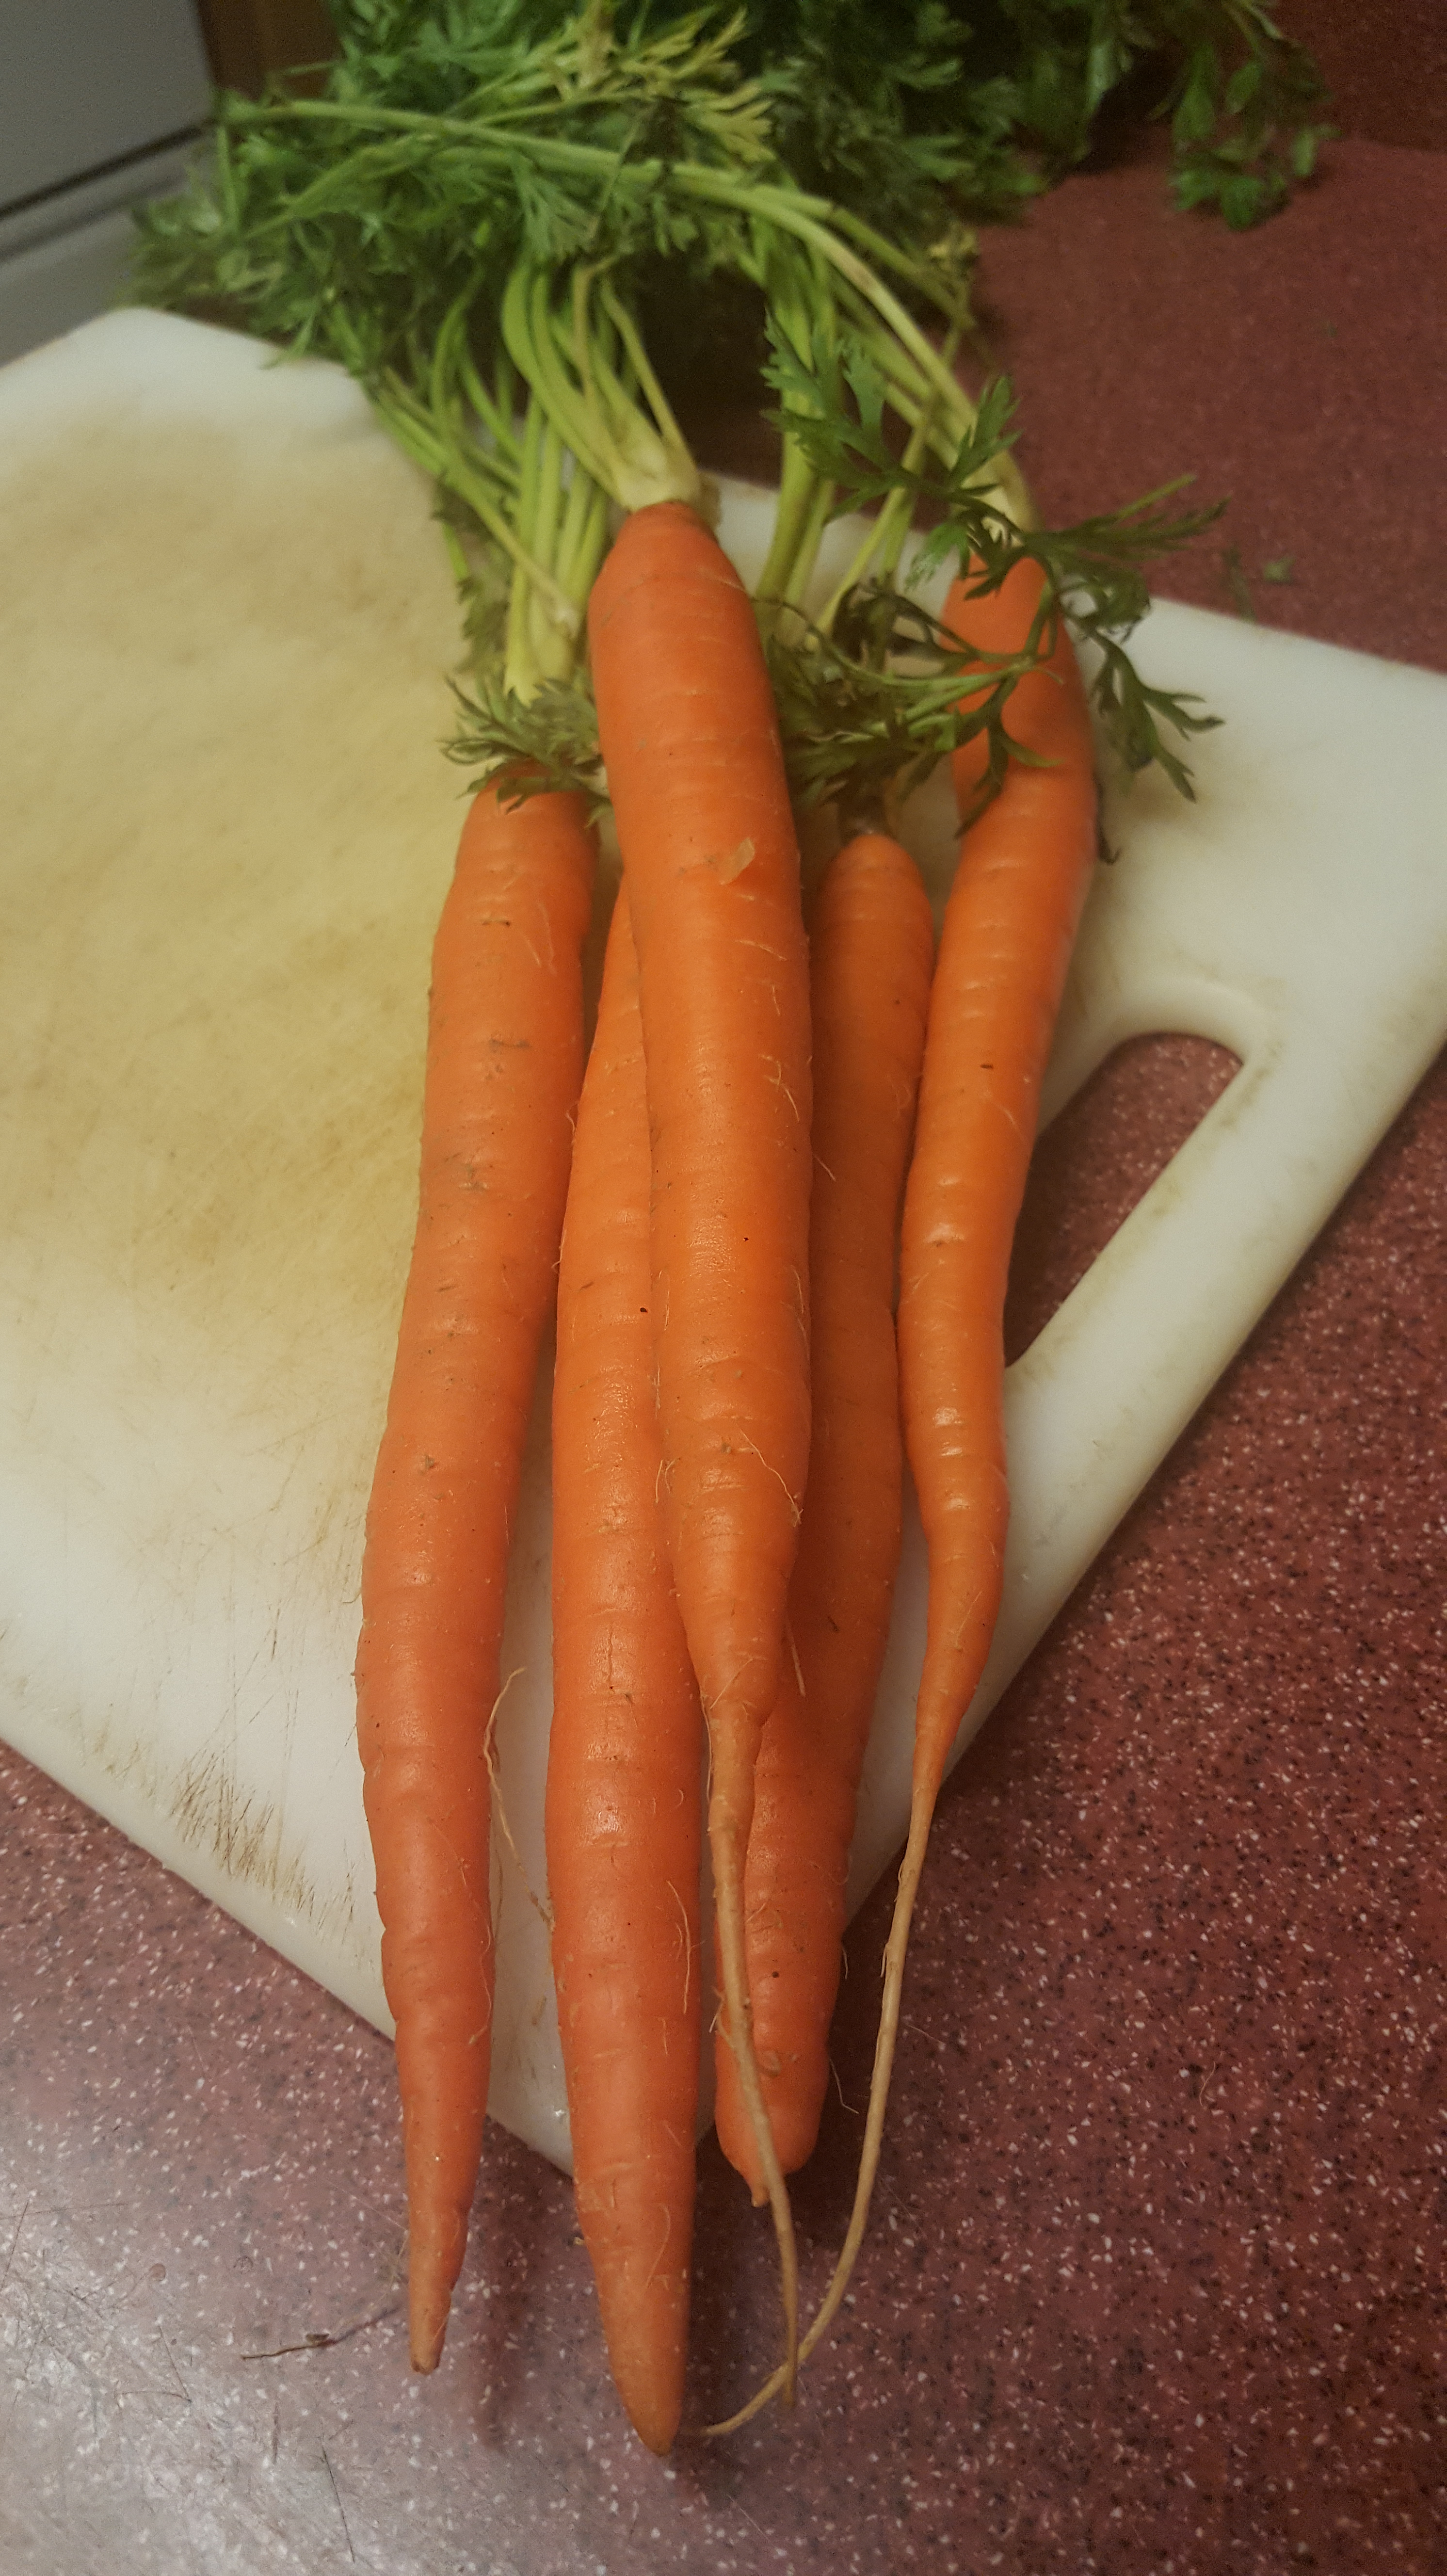 How to cure psoriasis with carrots bulk